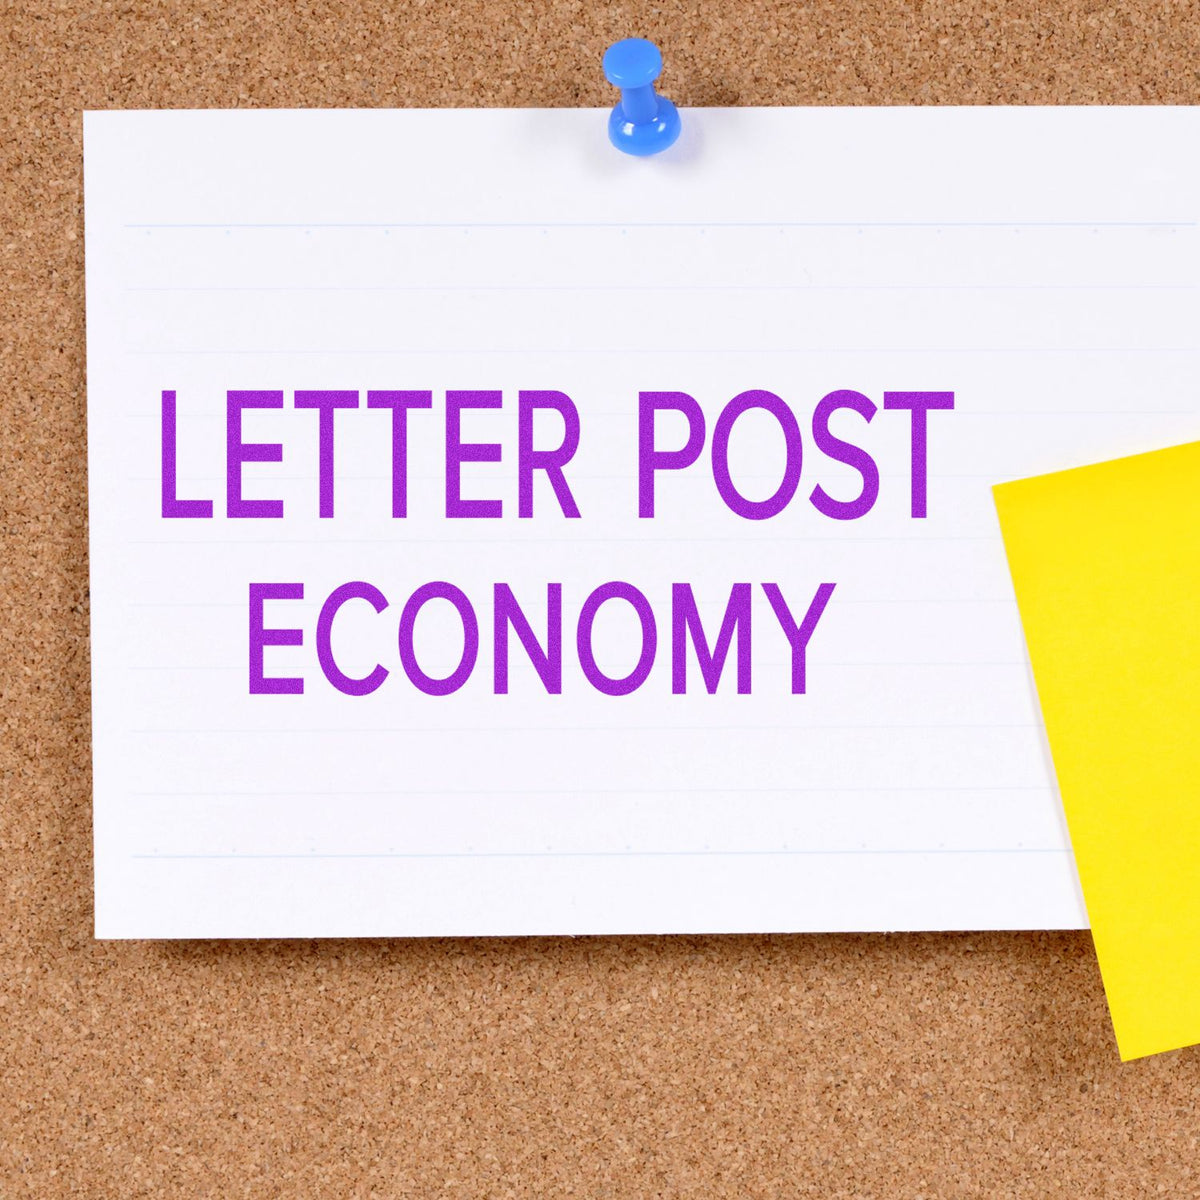 Letter Post Economy Rubber Stamp In Use